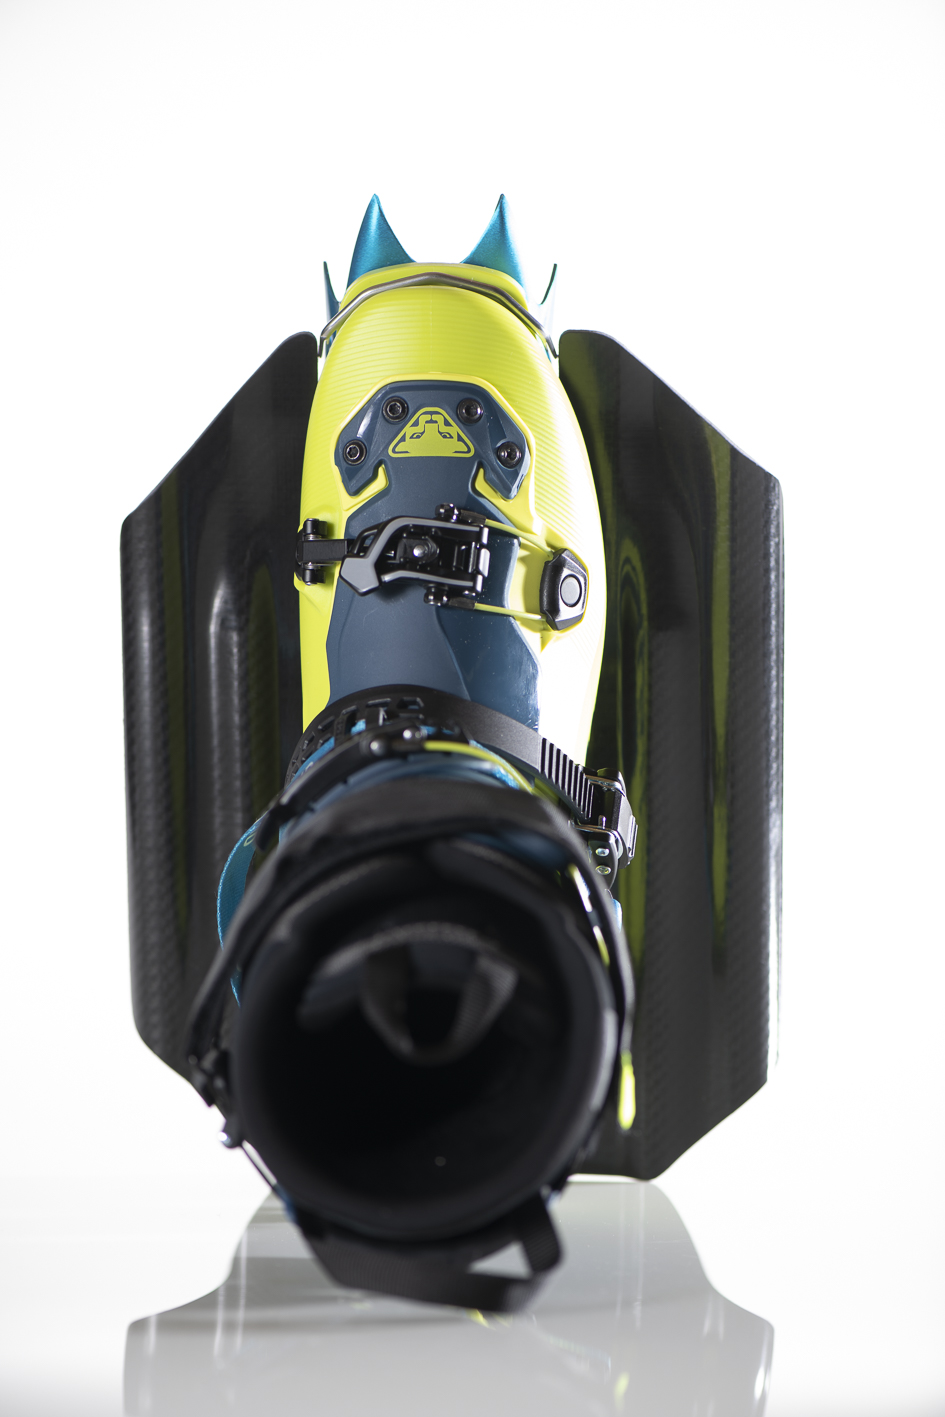 Cramplifier top view mounted on ski boot with edelrid Shark Lite crampon